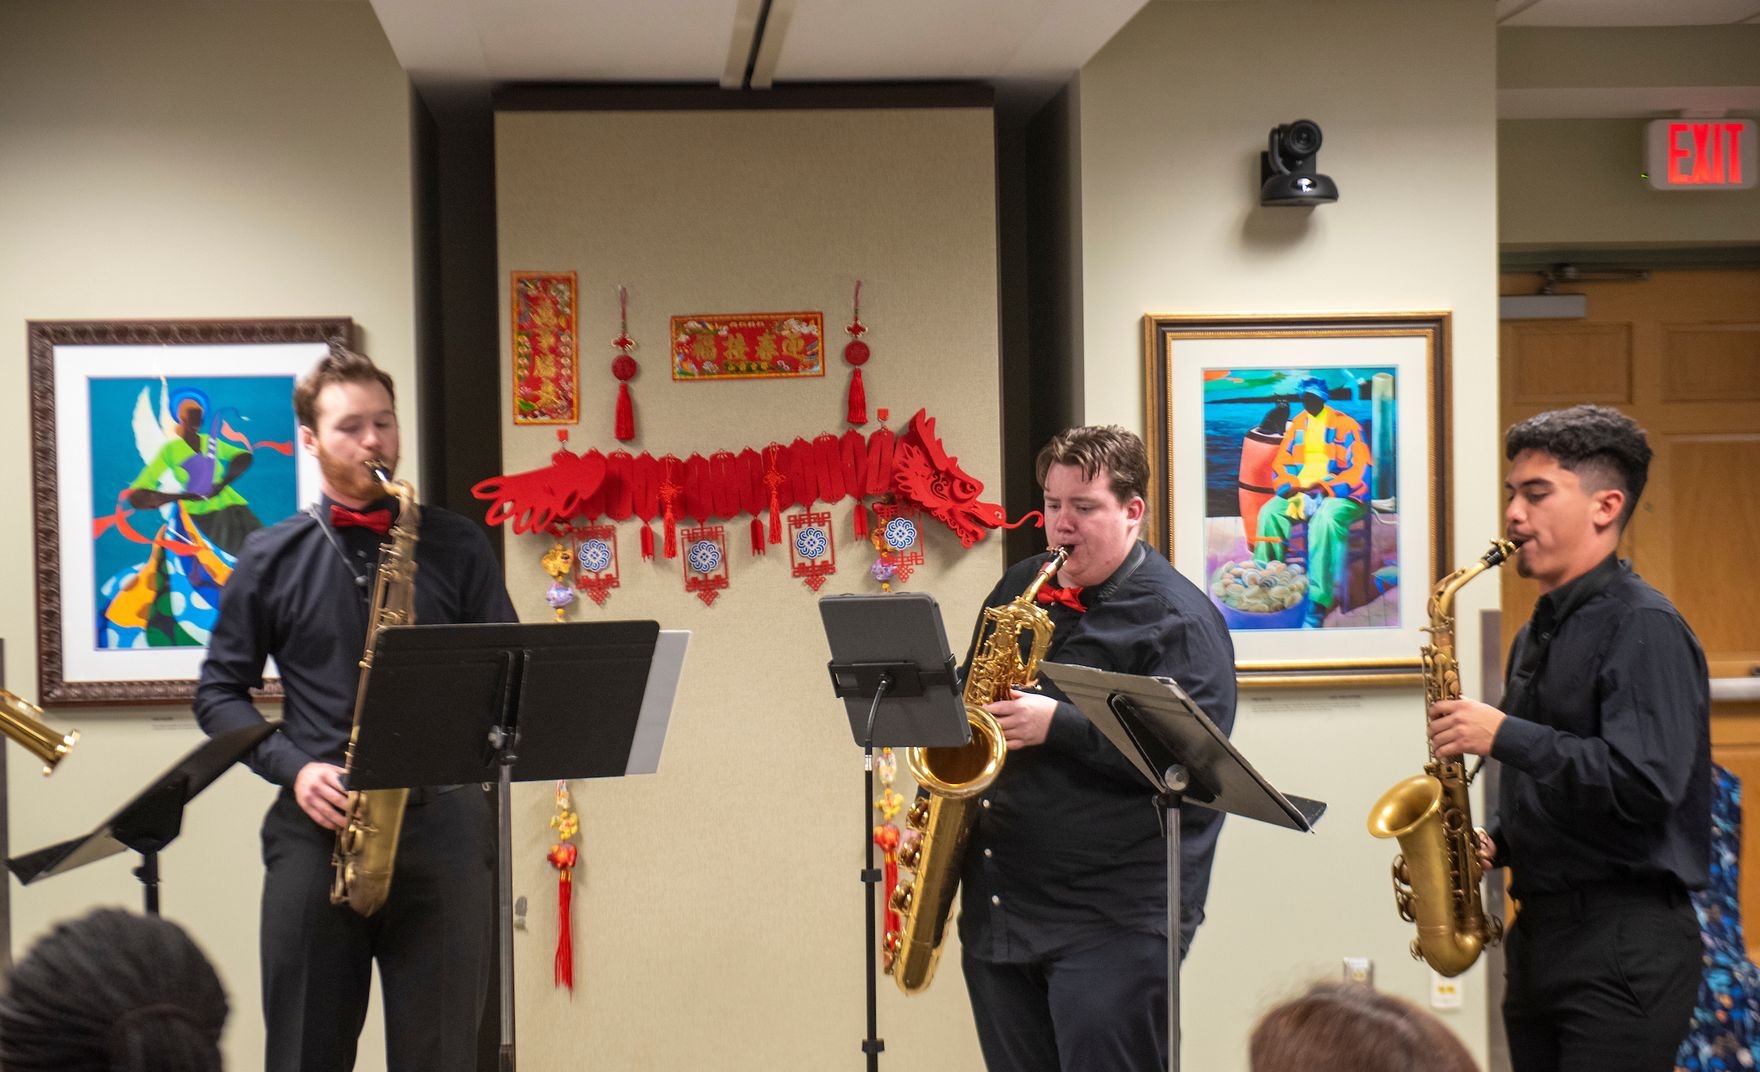 3 saxophonists play at an AHCC event